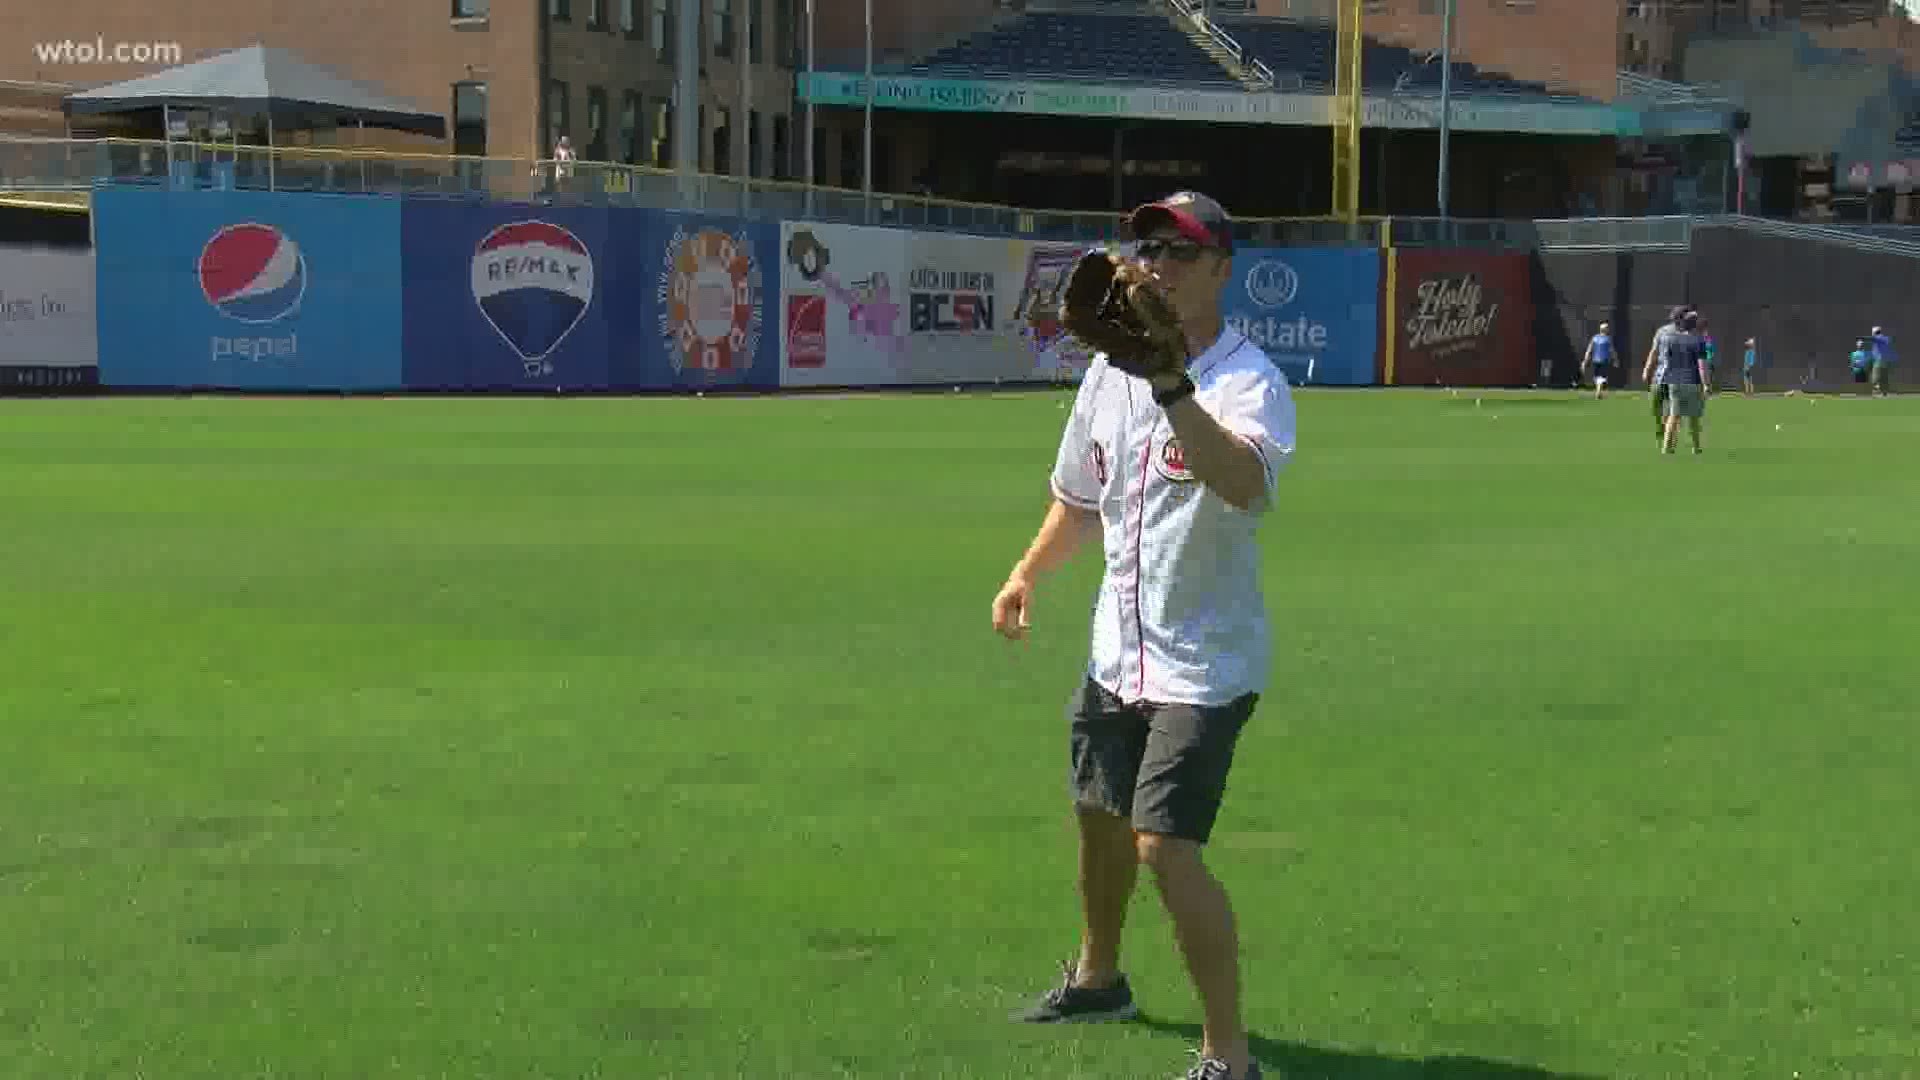 A home run of a gift for dad as they played catch in the outfield.